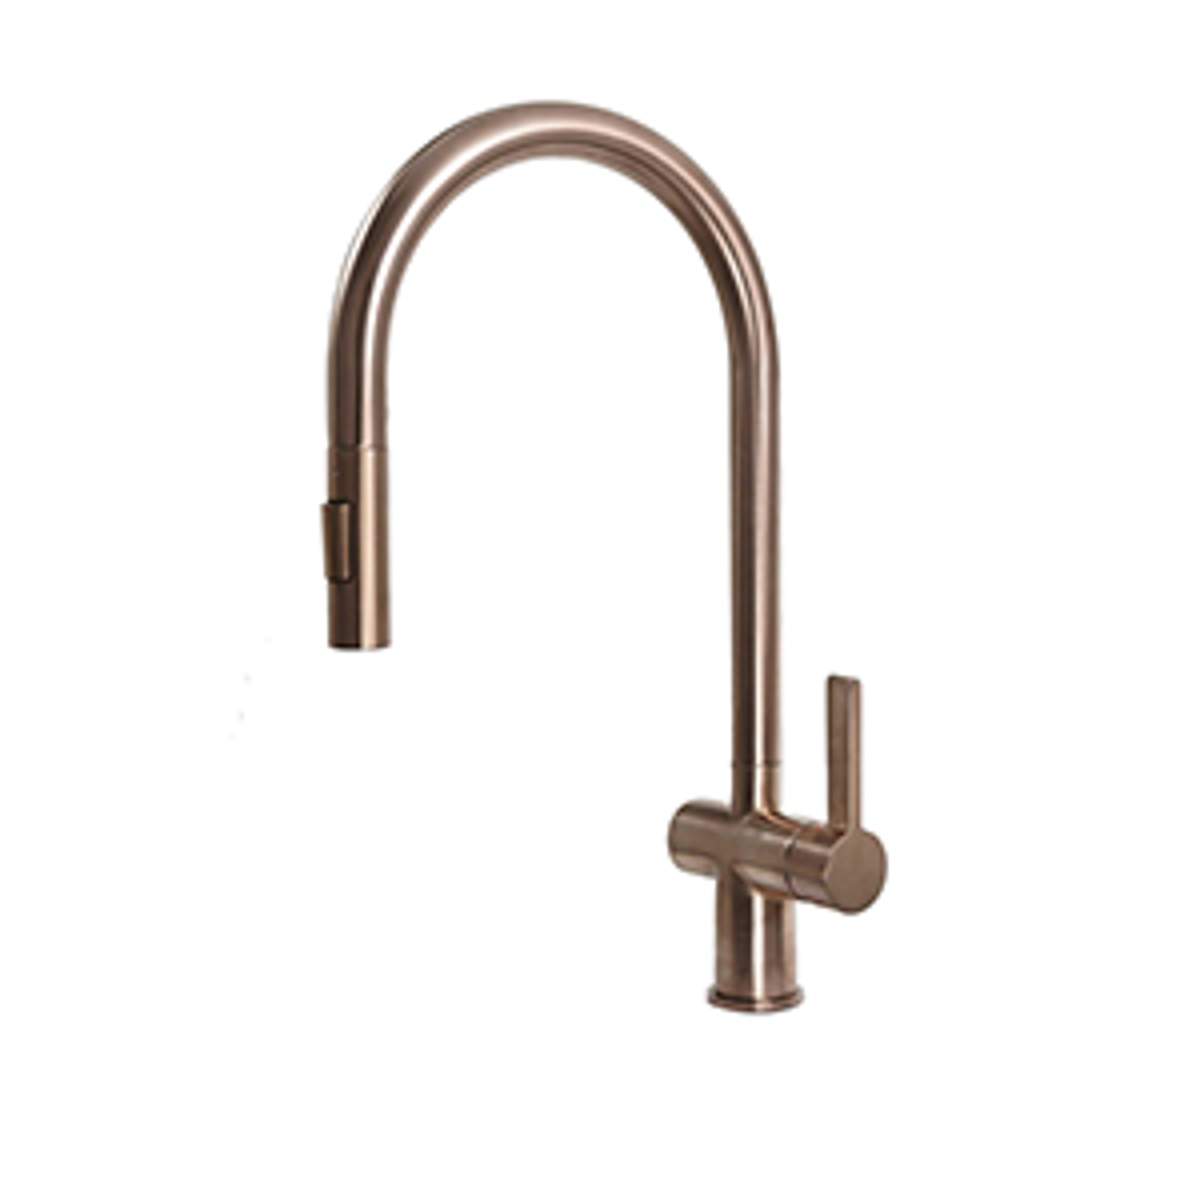 JTP Vos Brushed Bronze Single Lever Pull Out Sink Mixer (21127BRZ)